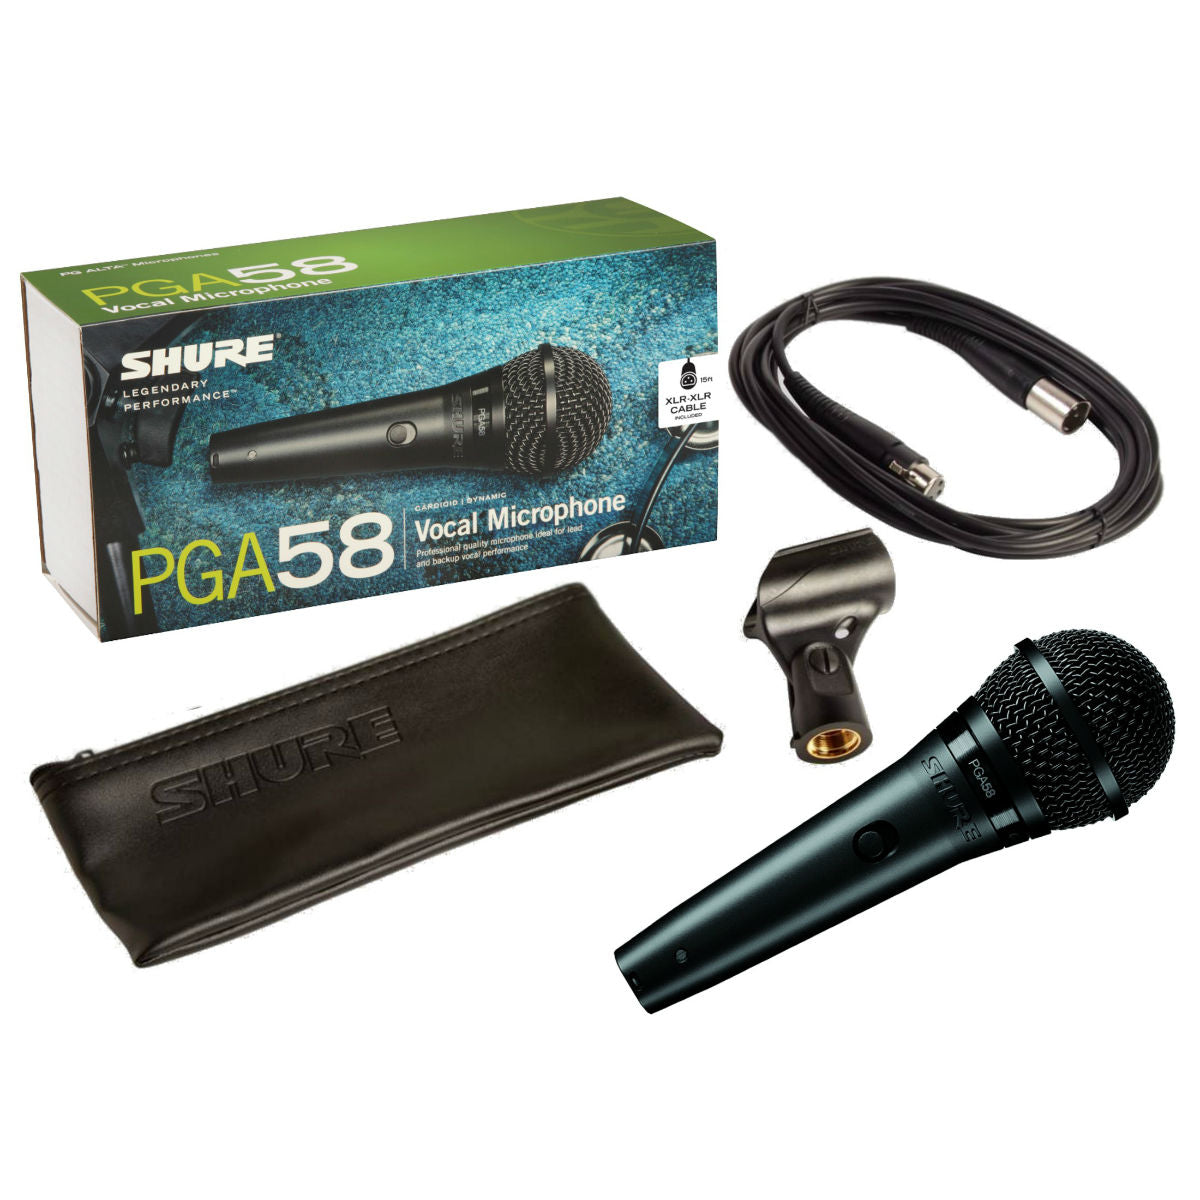 Shure PGA58 Dynamic Vocal Microphone with XLR Cable